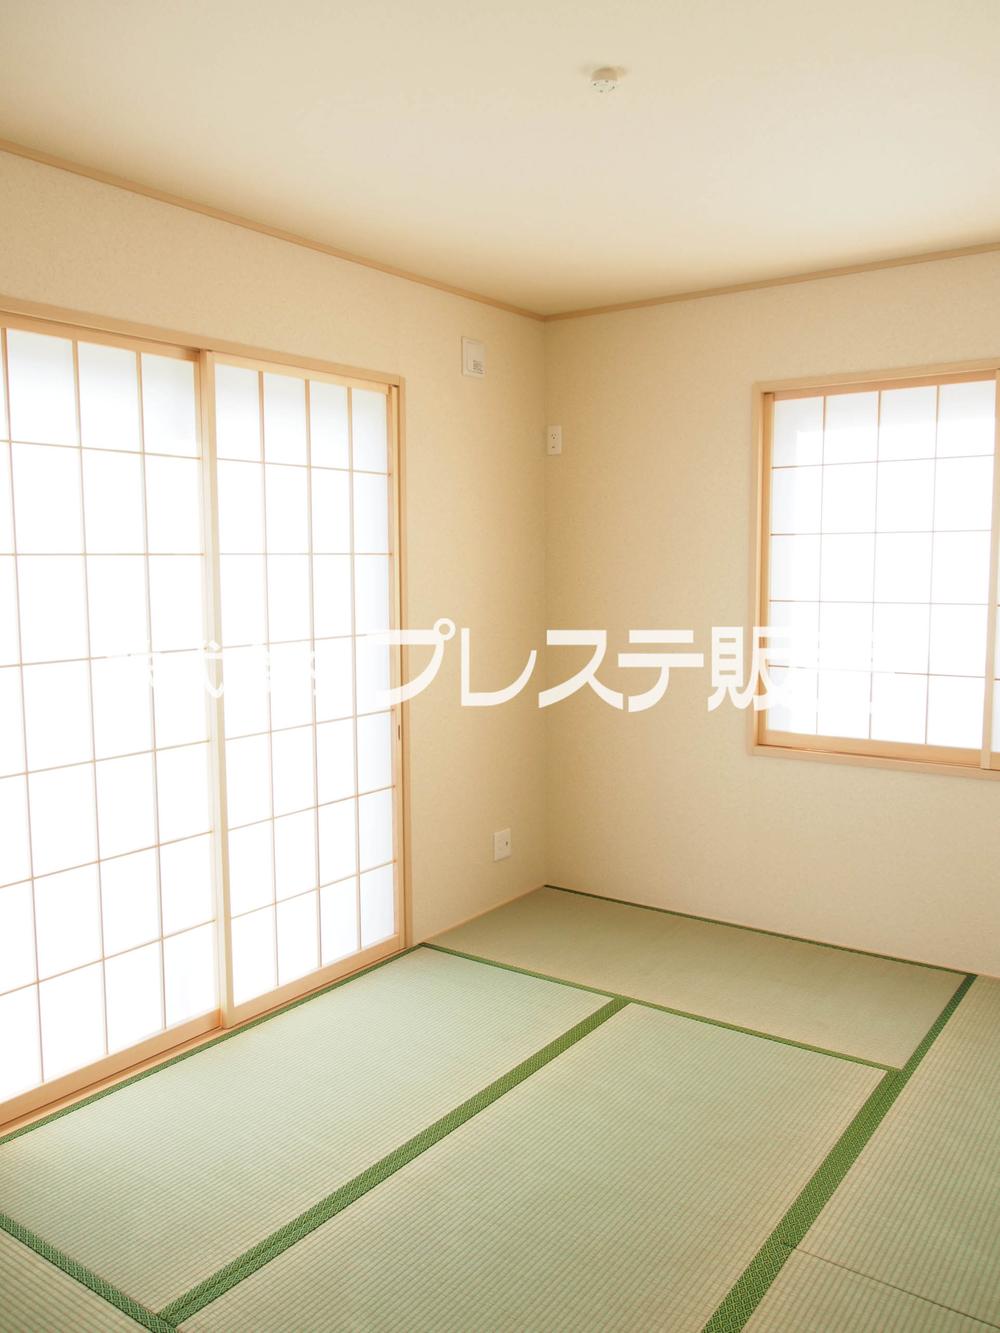 Same specifications photos (Other introspection). It is south-facing Japanese-style room